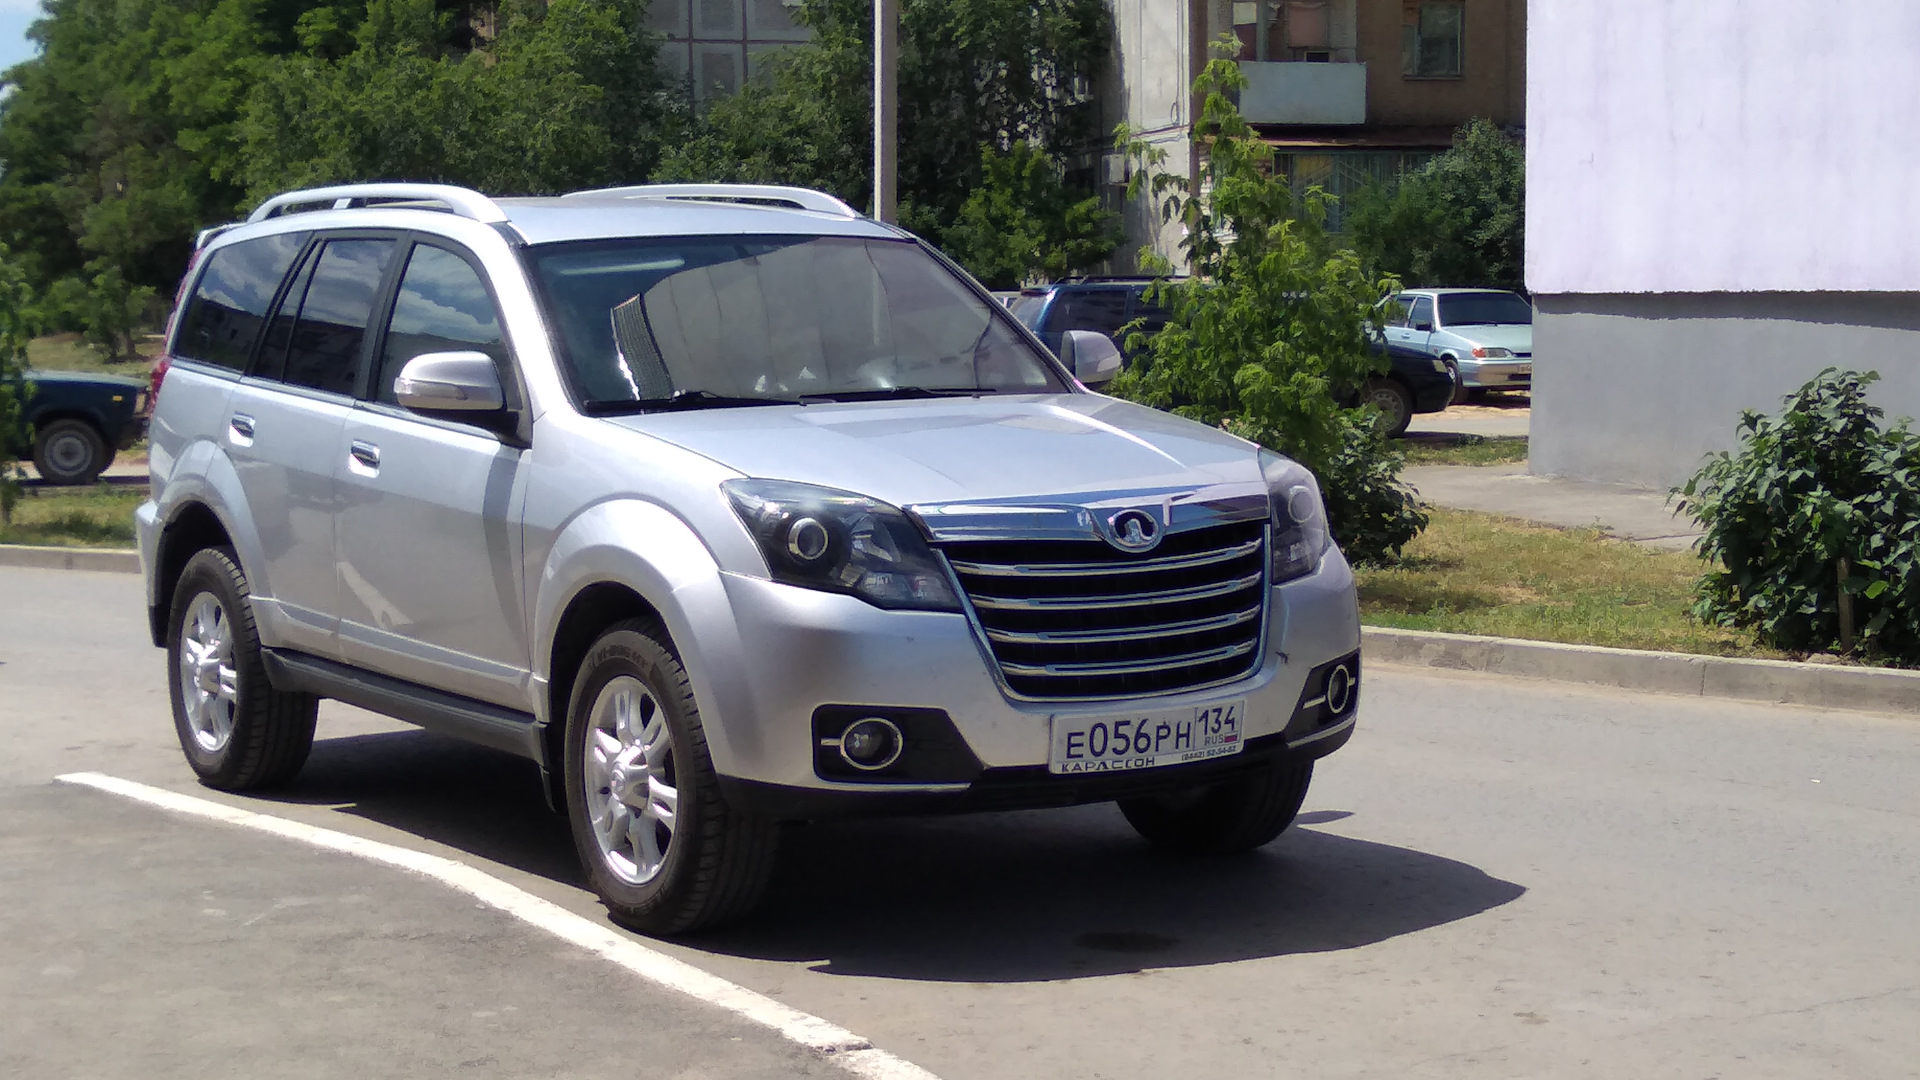 Ховер 2014. Great Wall Hover m2. Hover h4. Sang young 2014 Hover.